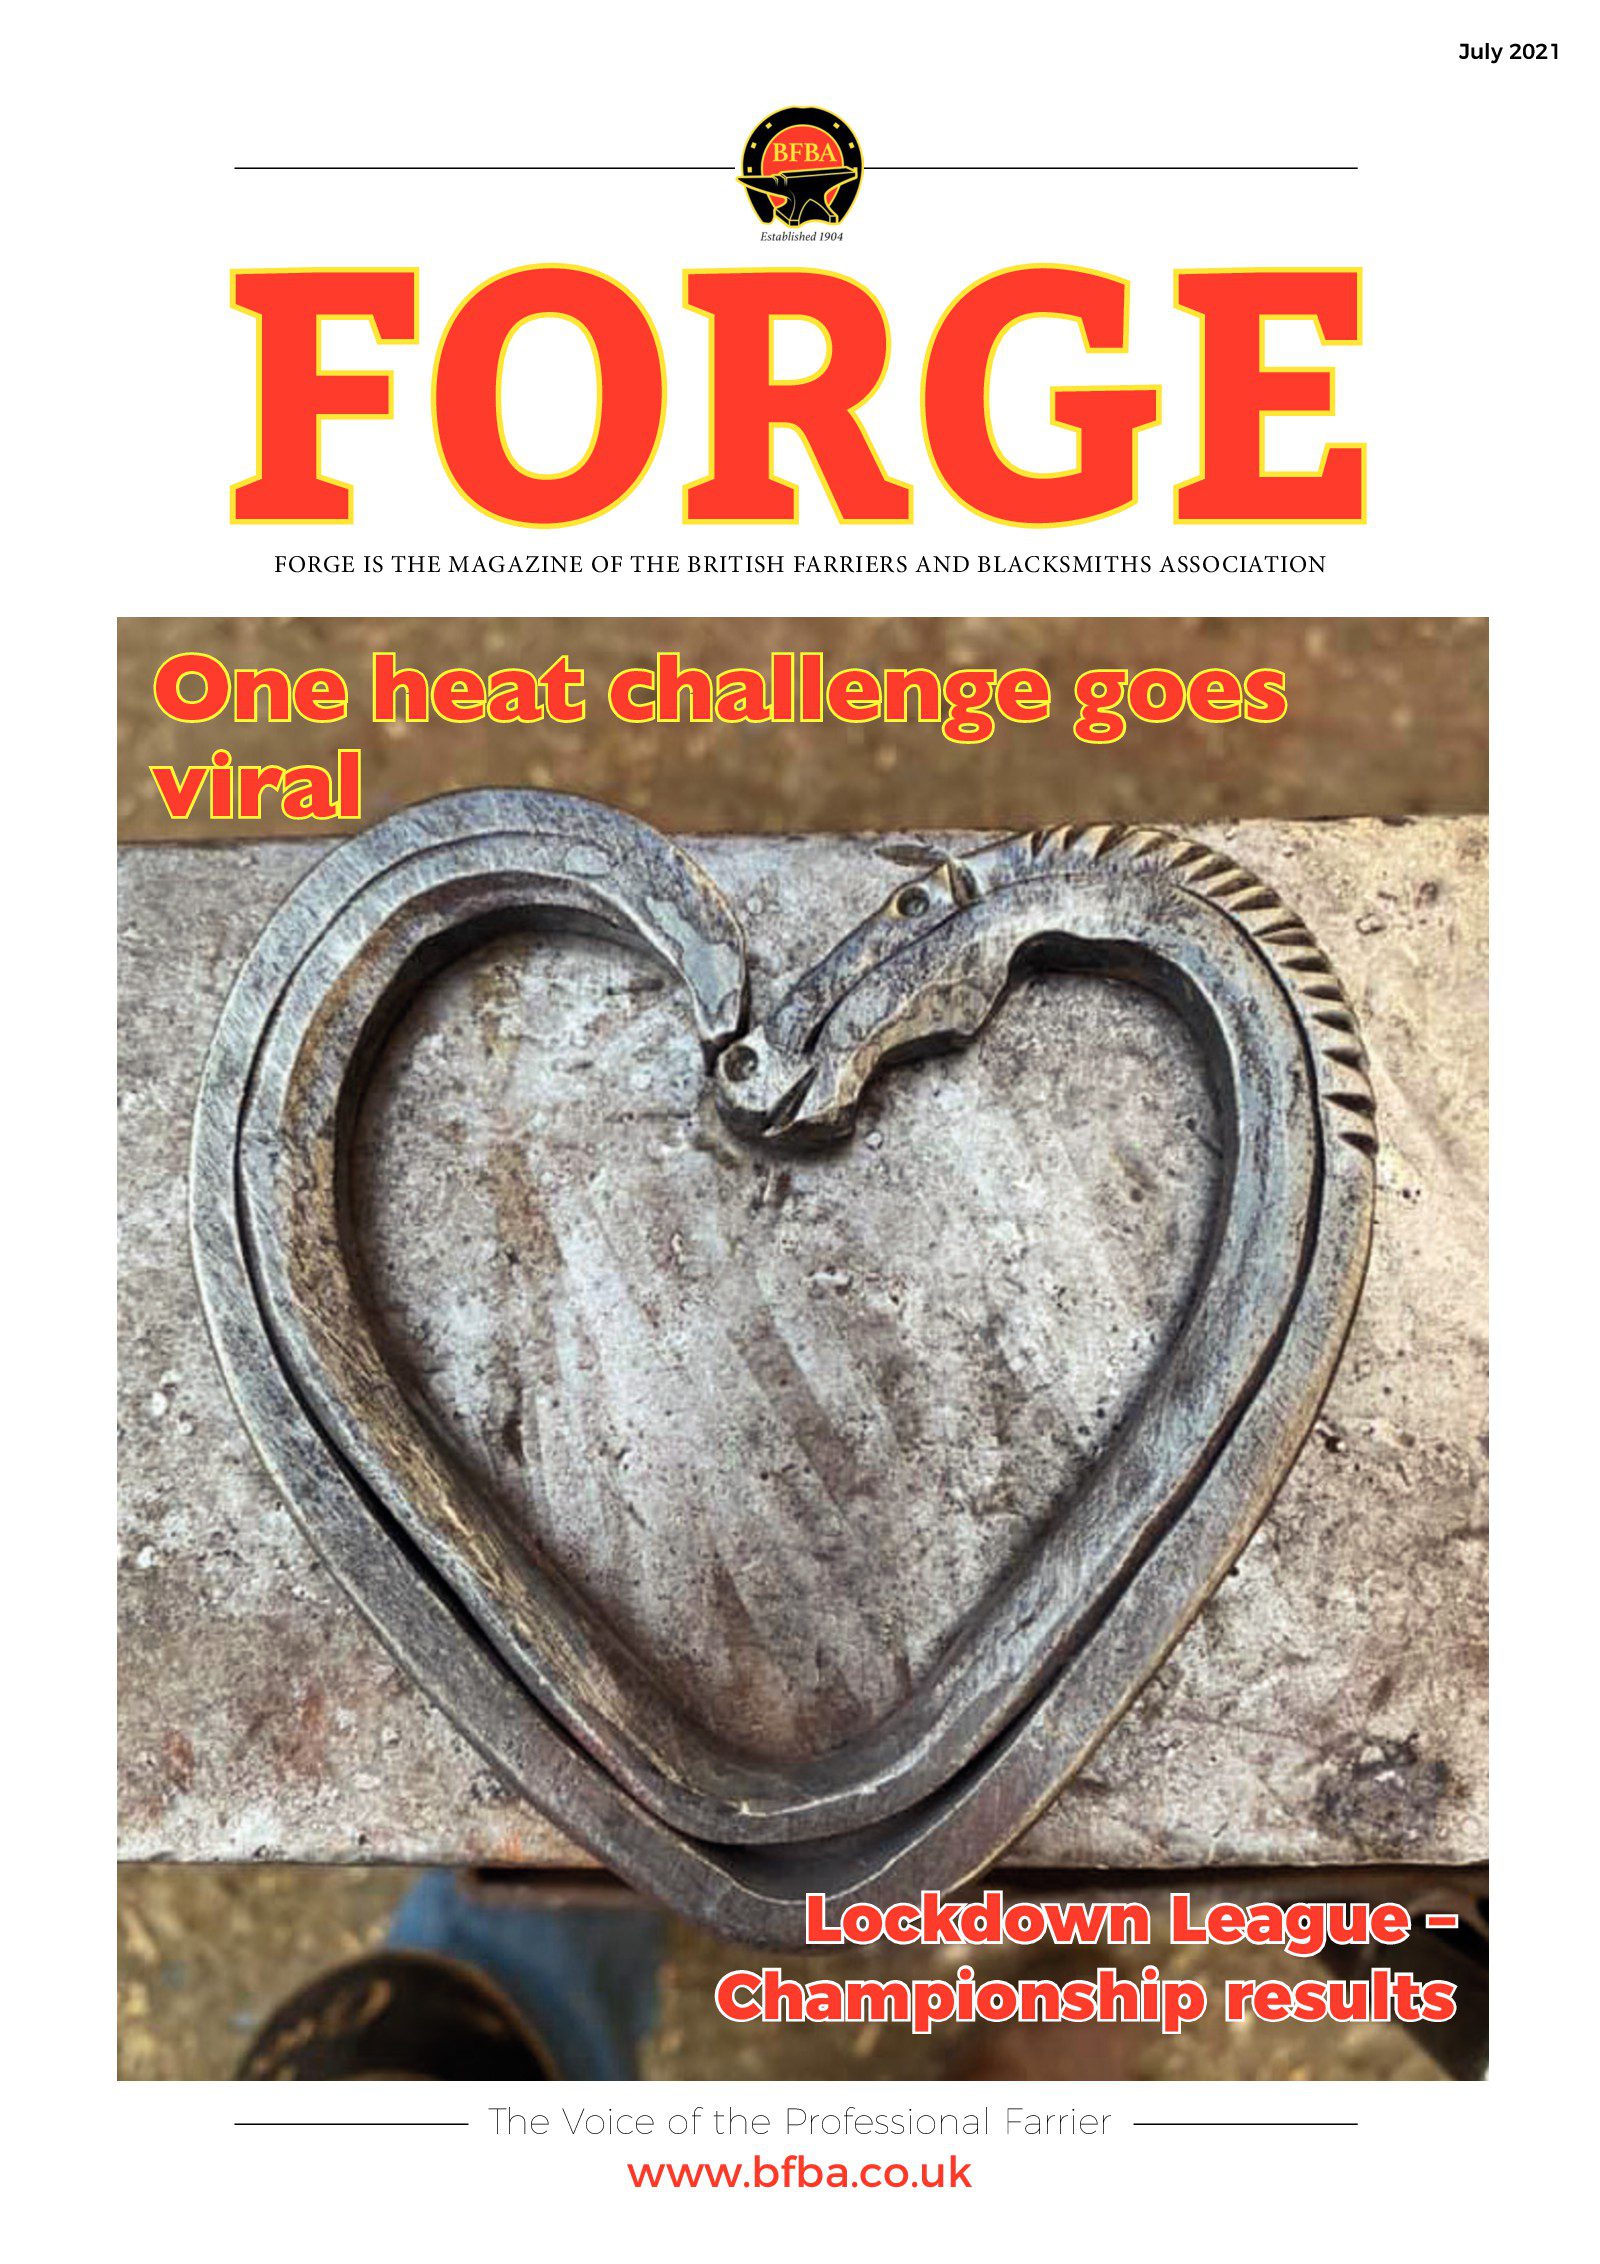 Forge Magazine July 2021 Cover